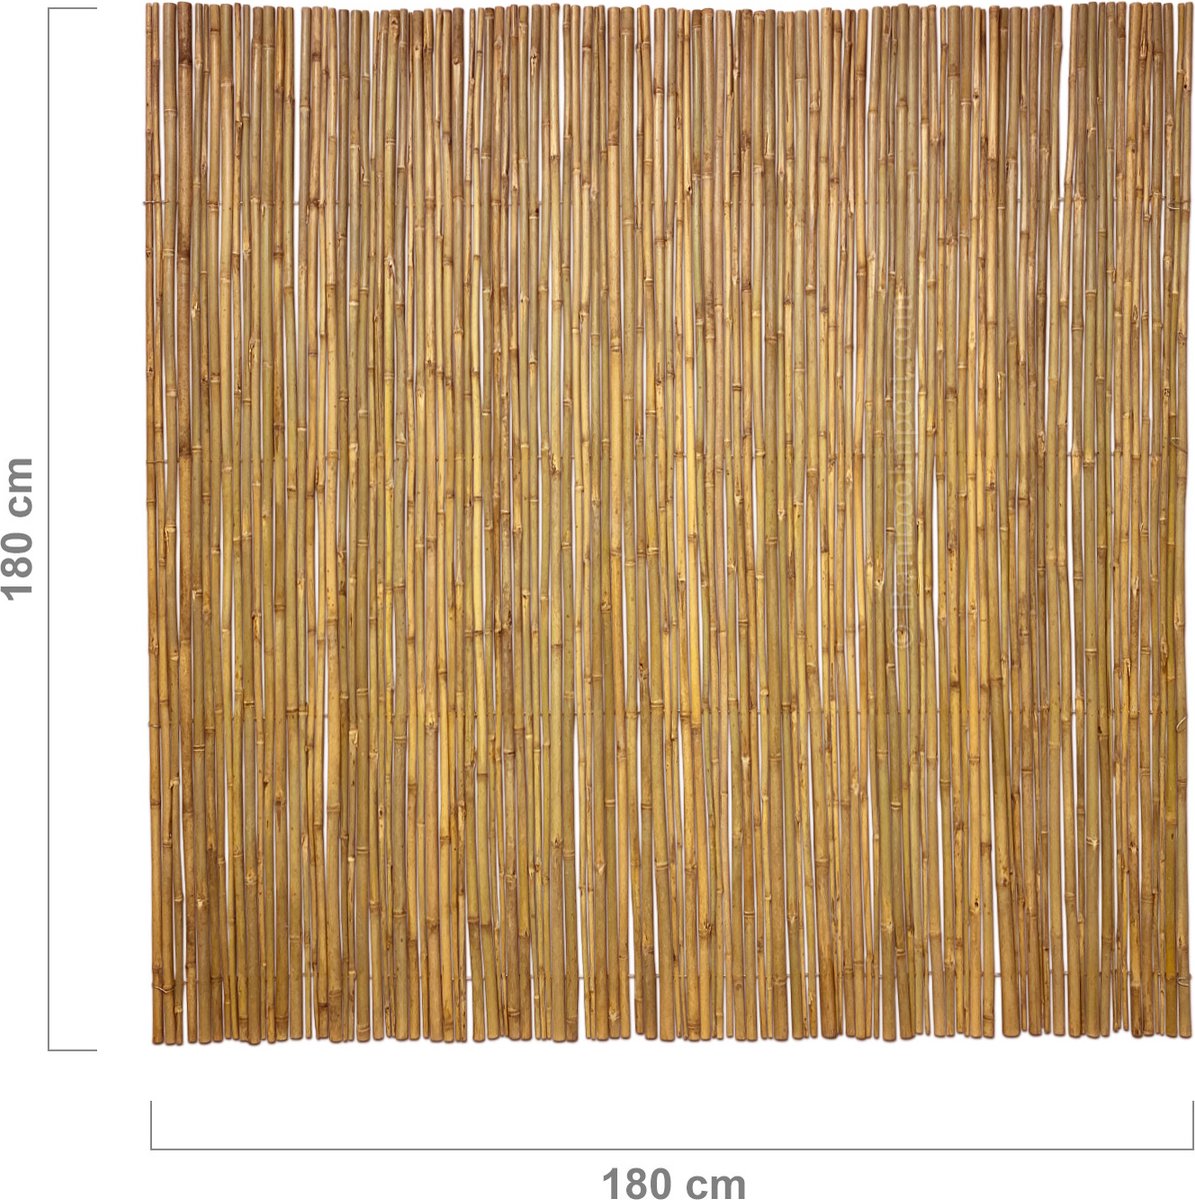 Bamboo Import Europe Bamboemat op Rol Budget 180 x 180 cm